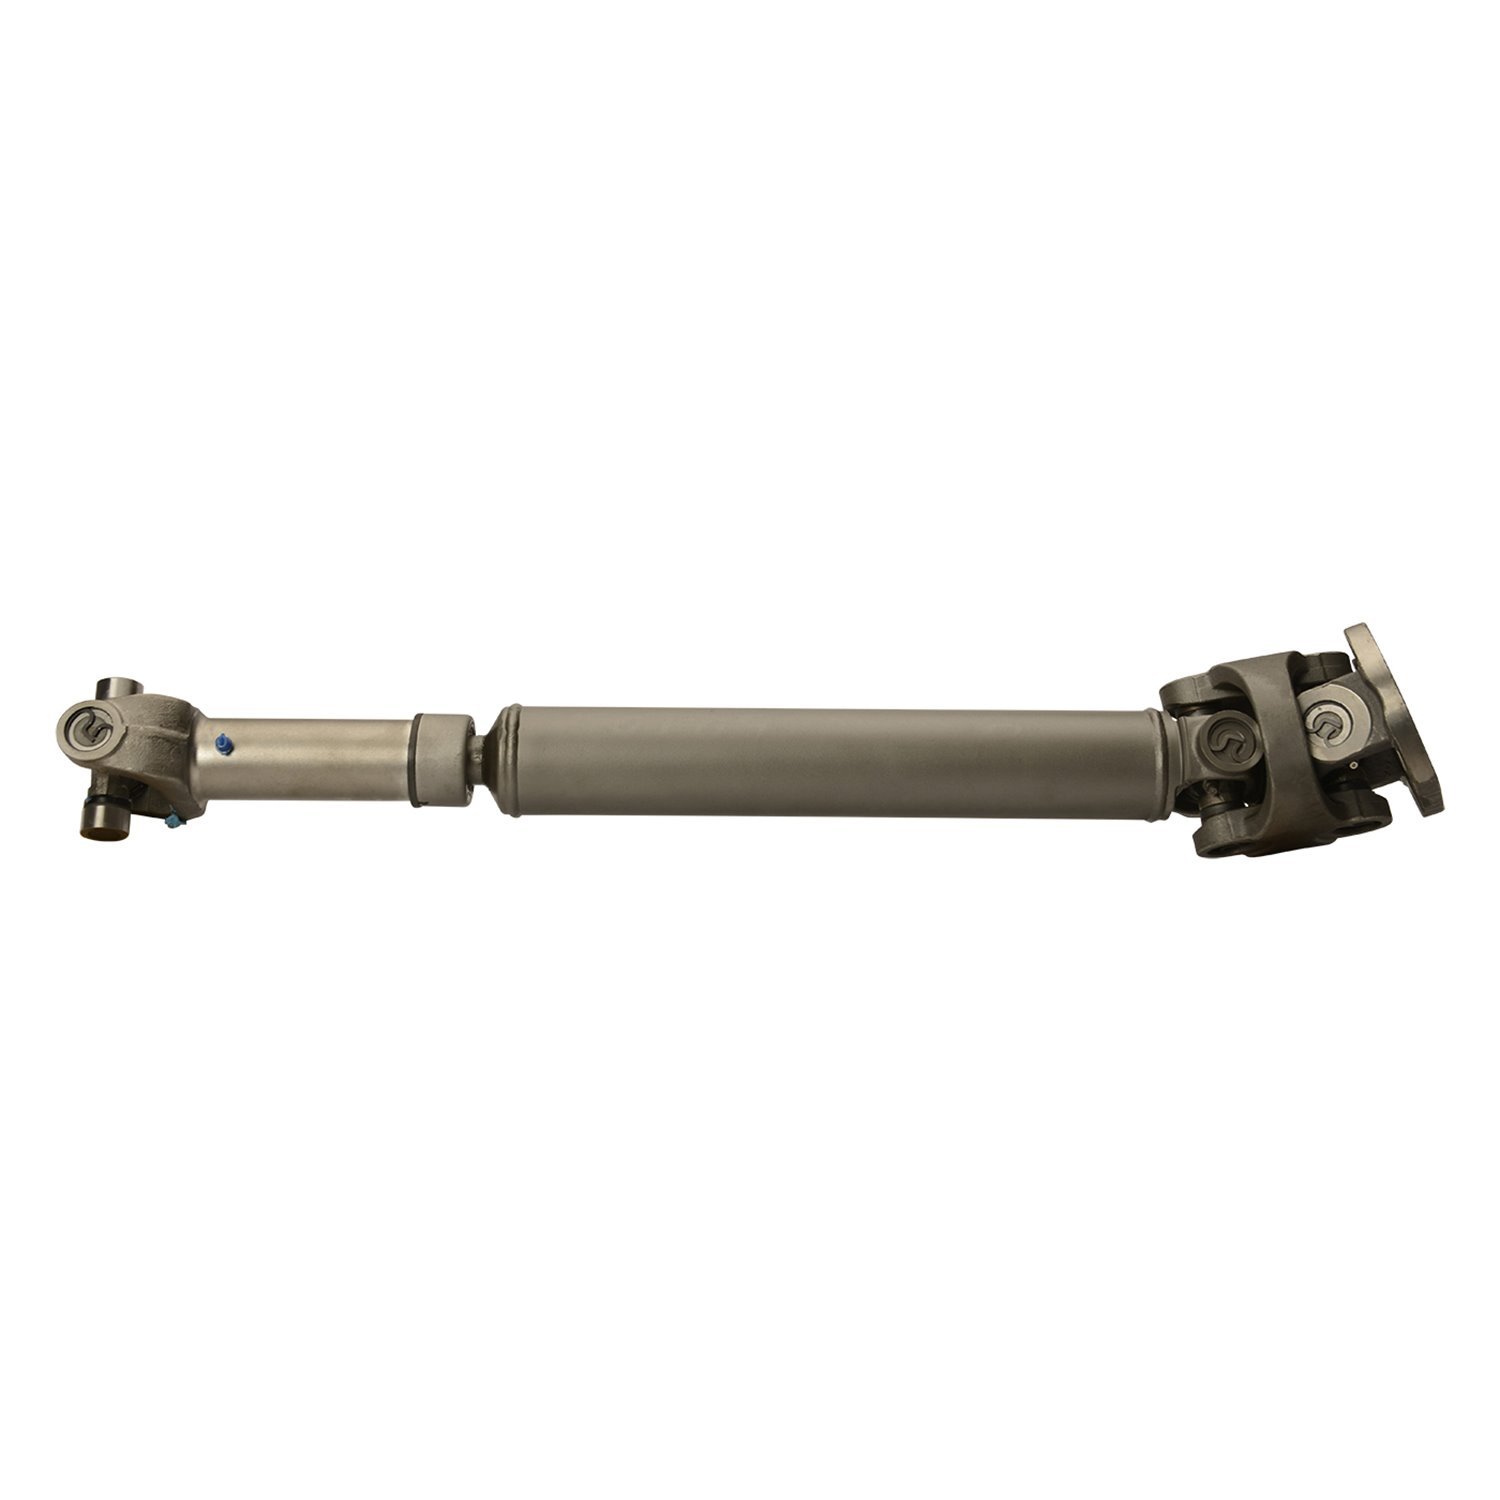 USA Standard ZDS9299 Front Driveshaft, For Excursion/Expedition, 39.75 in. Center-To-Center